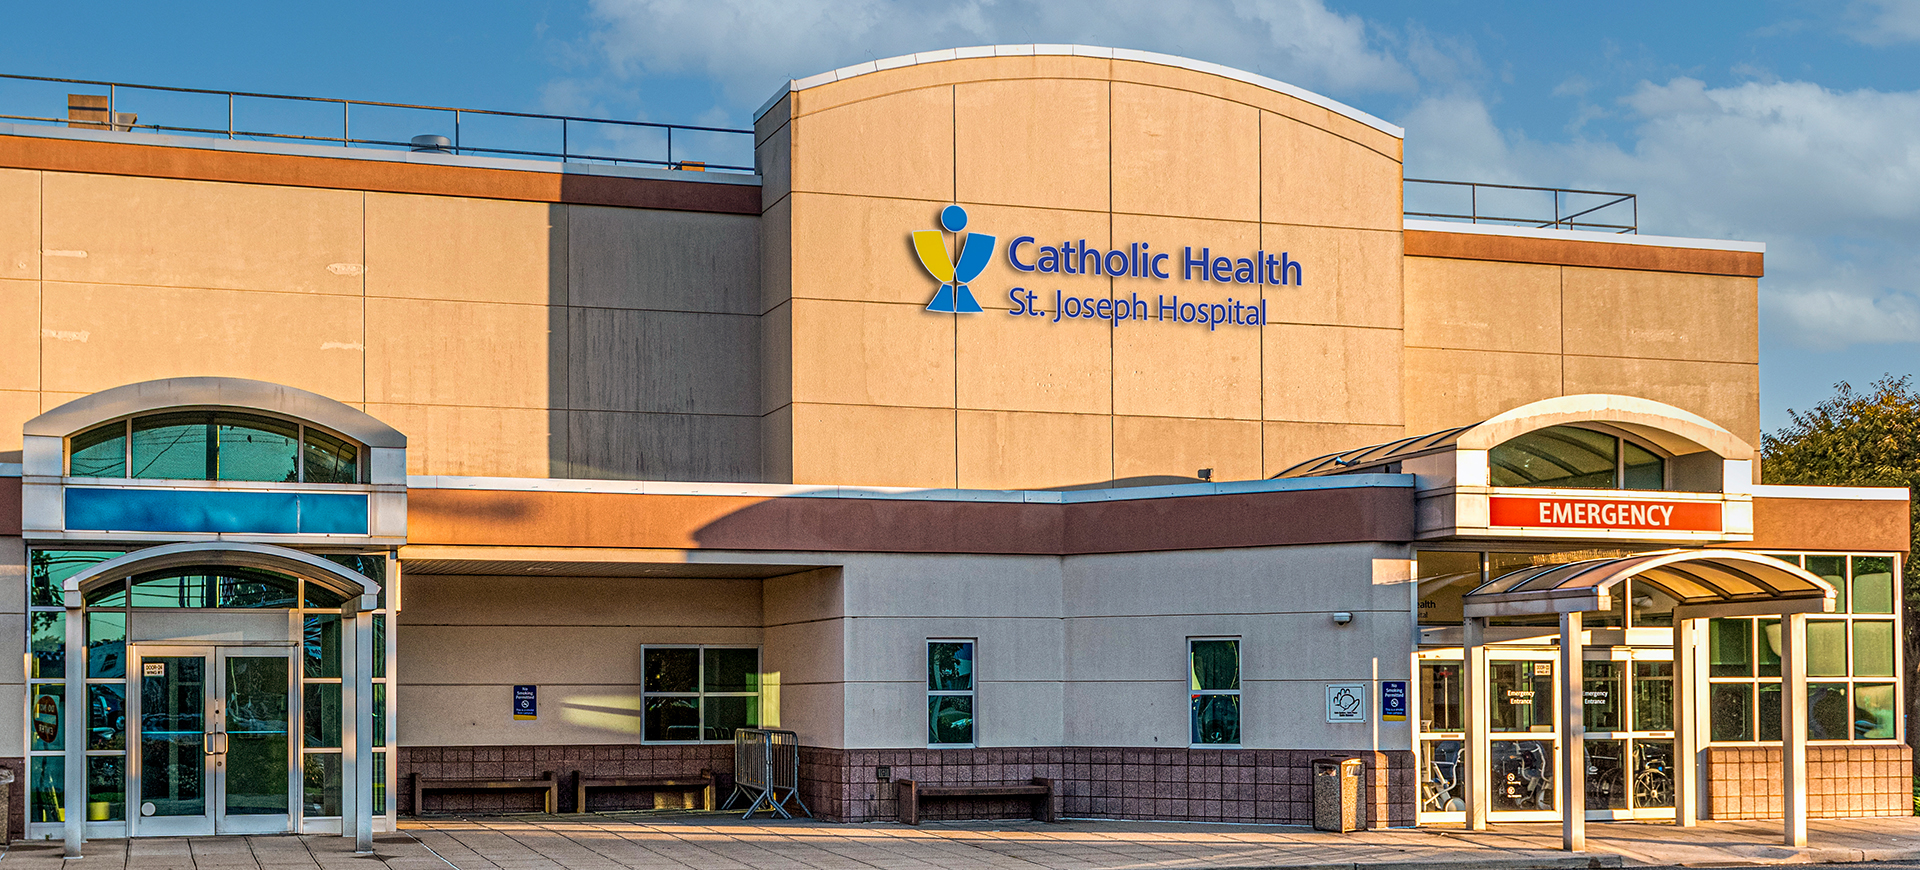       	        
	  	  The Cancer Institute at St. Joseph Hospital
	  	  
	        